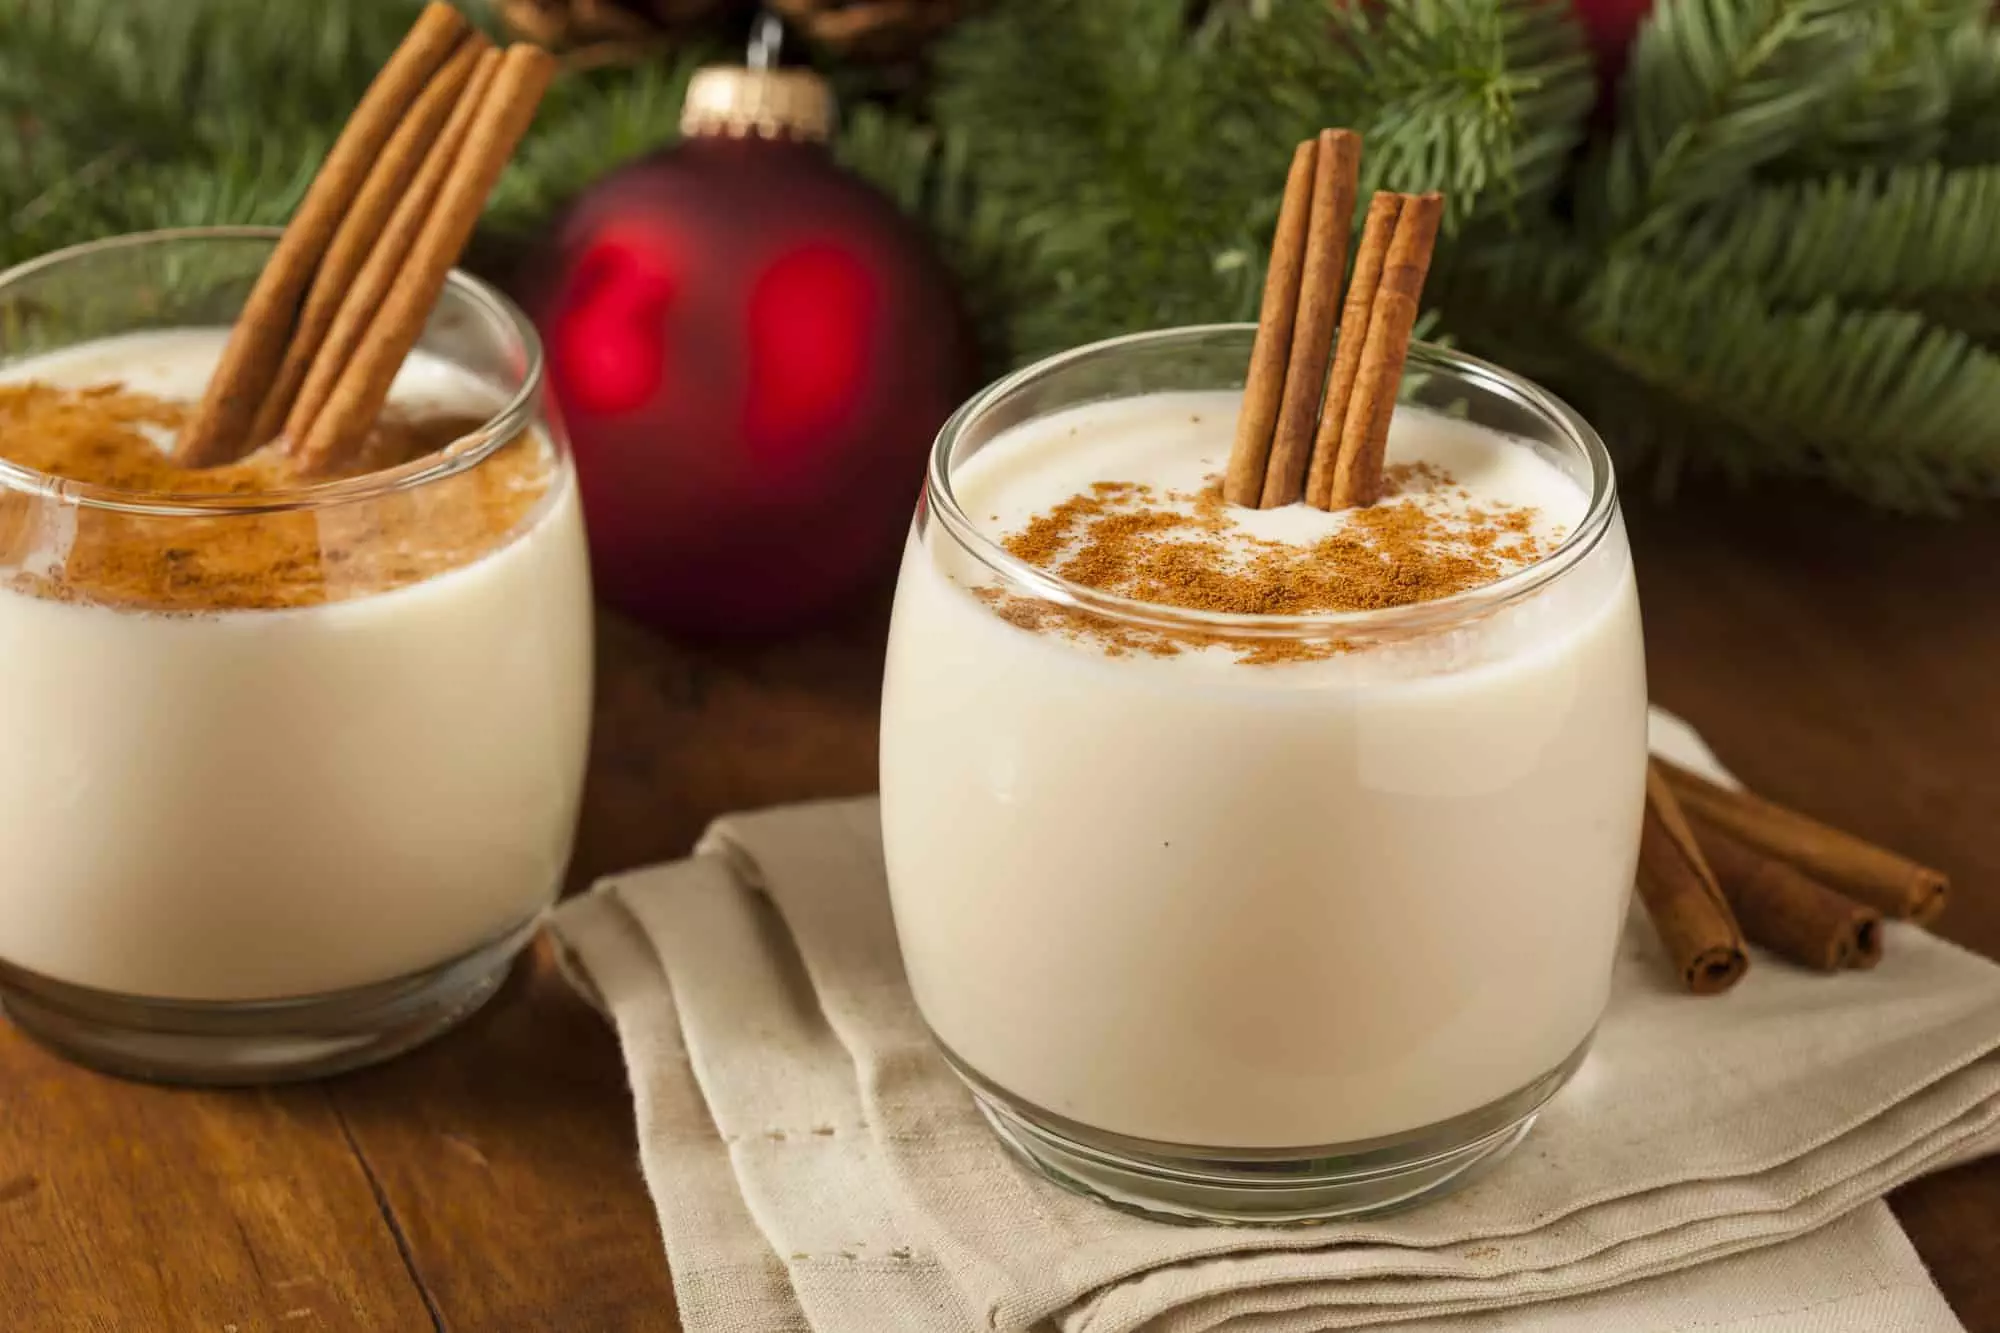 Two glasses of decadent, creamy non-alcoholic eggnog with cinnamon sticks and Christmas decorations